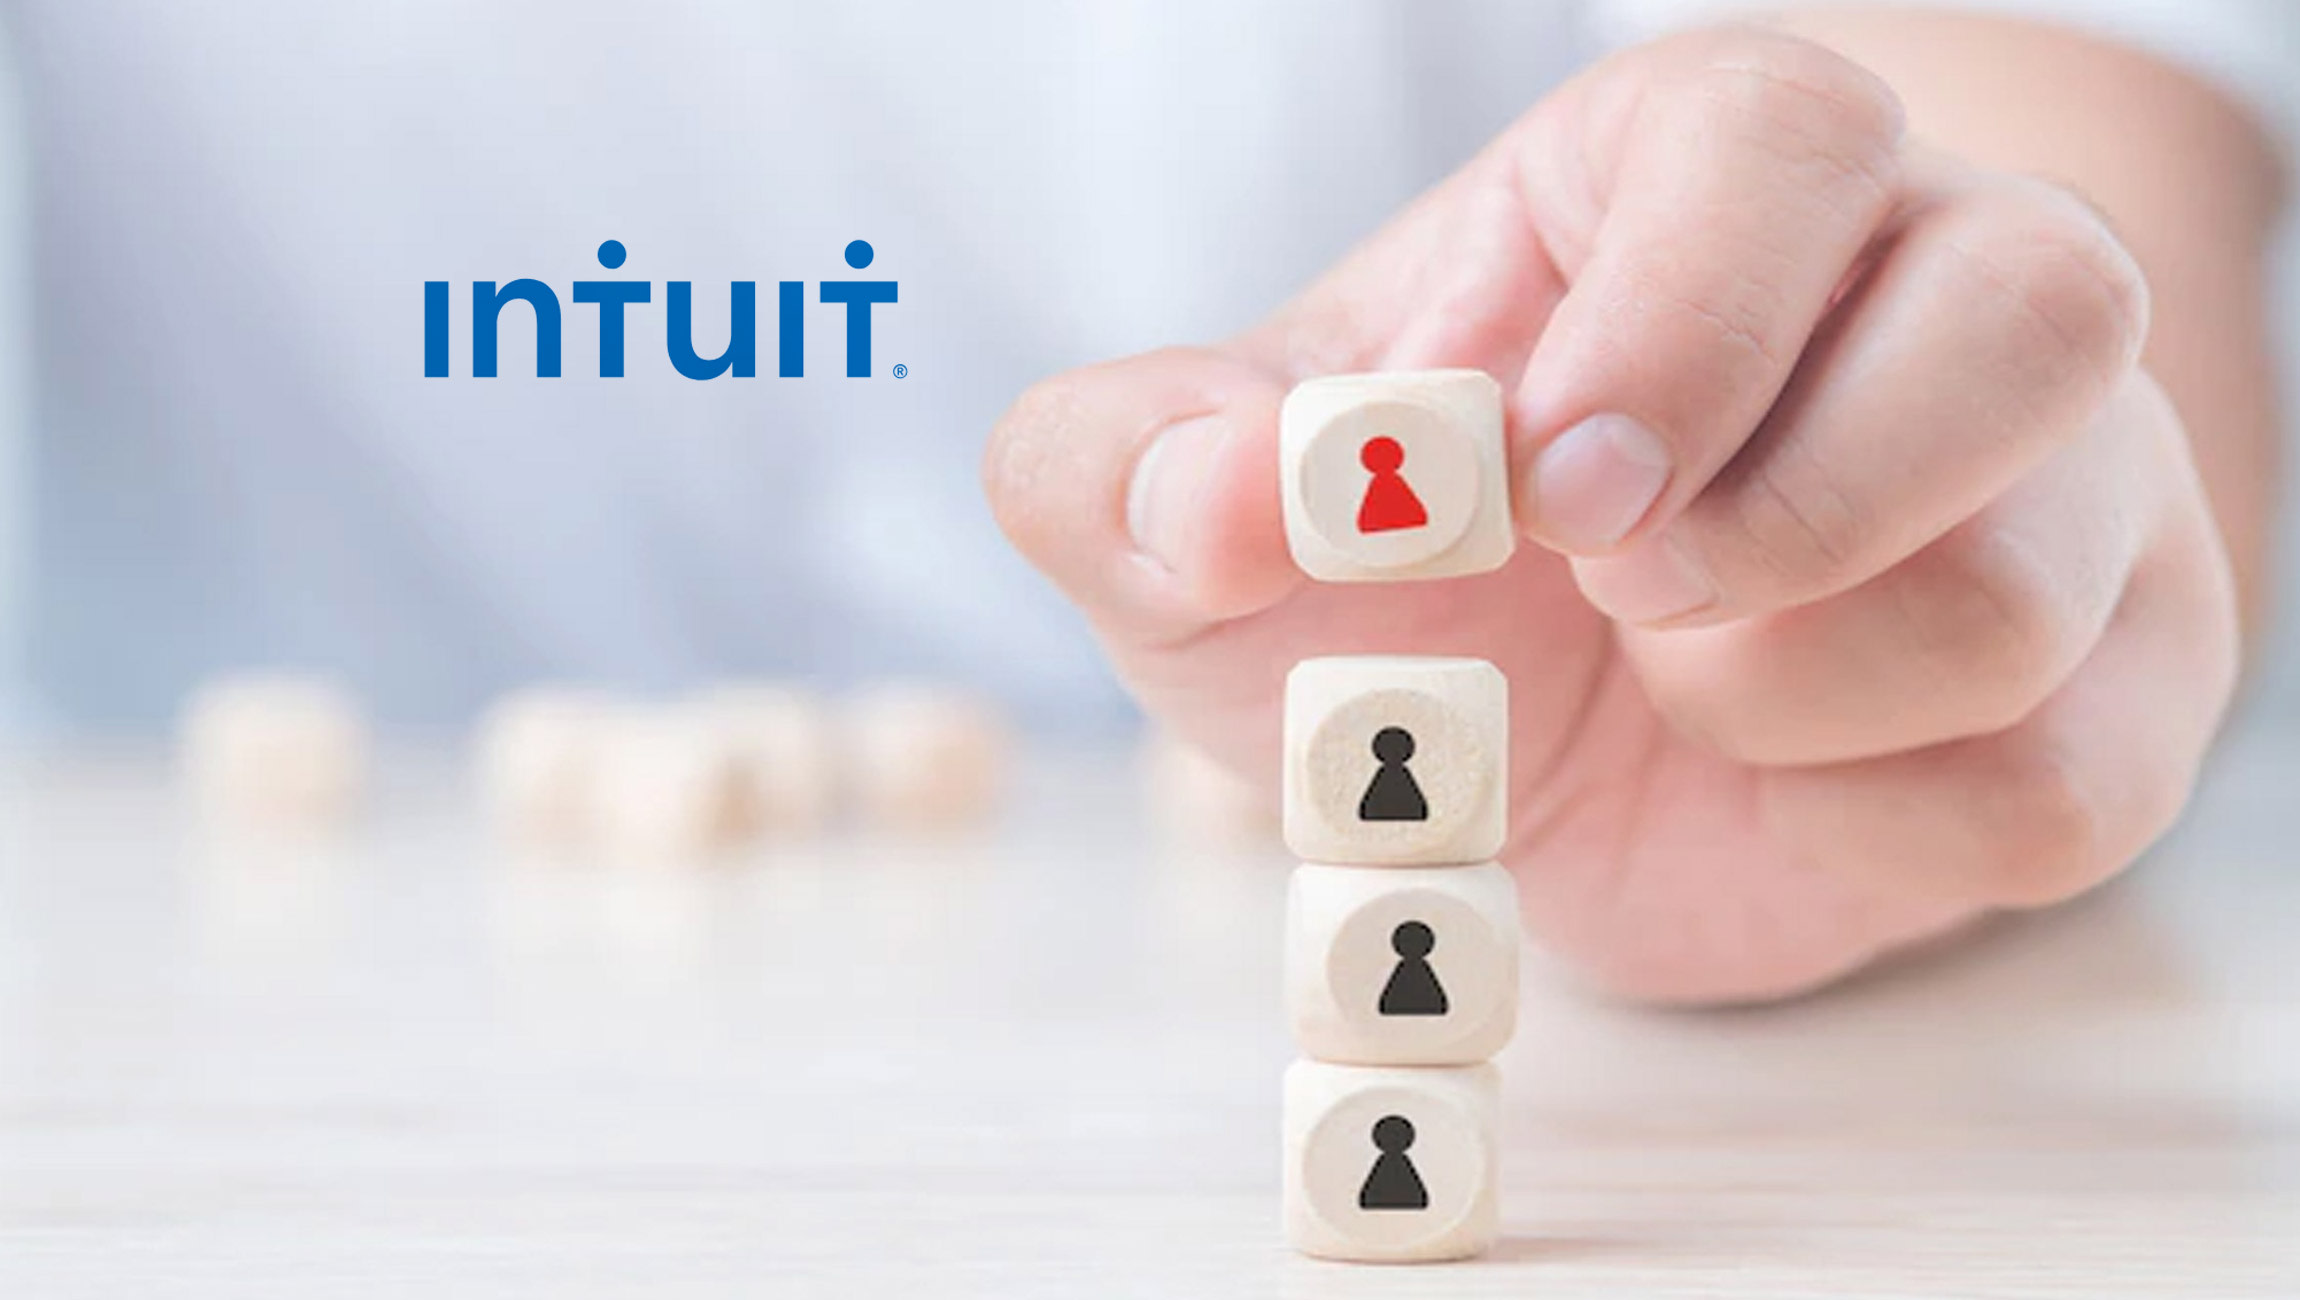 Intuit-Mailchimp-CEO-and-Co-Founder-Ben-Chestnut-to-take-on-Business-Advisor-Role-SVP-of-Intuit-QuickBooks-Money-Platform-Rania-Succar-assumes-Mailchimp-CEO-Duties